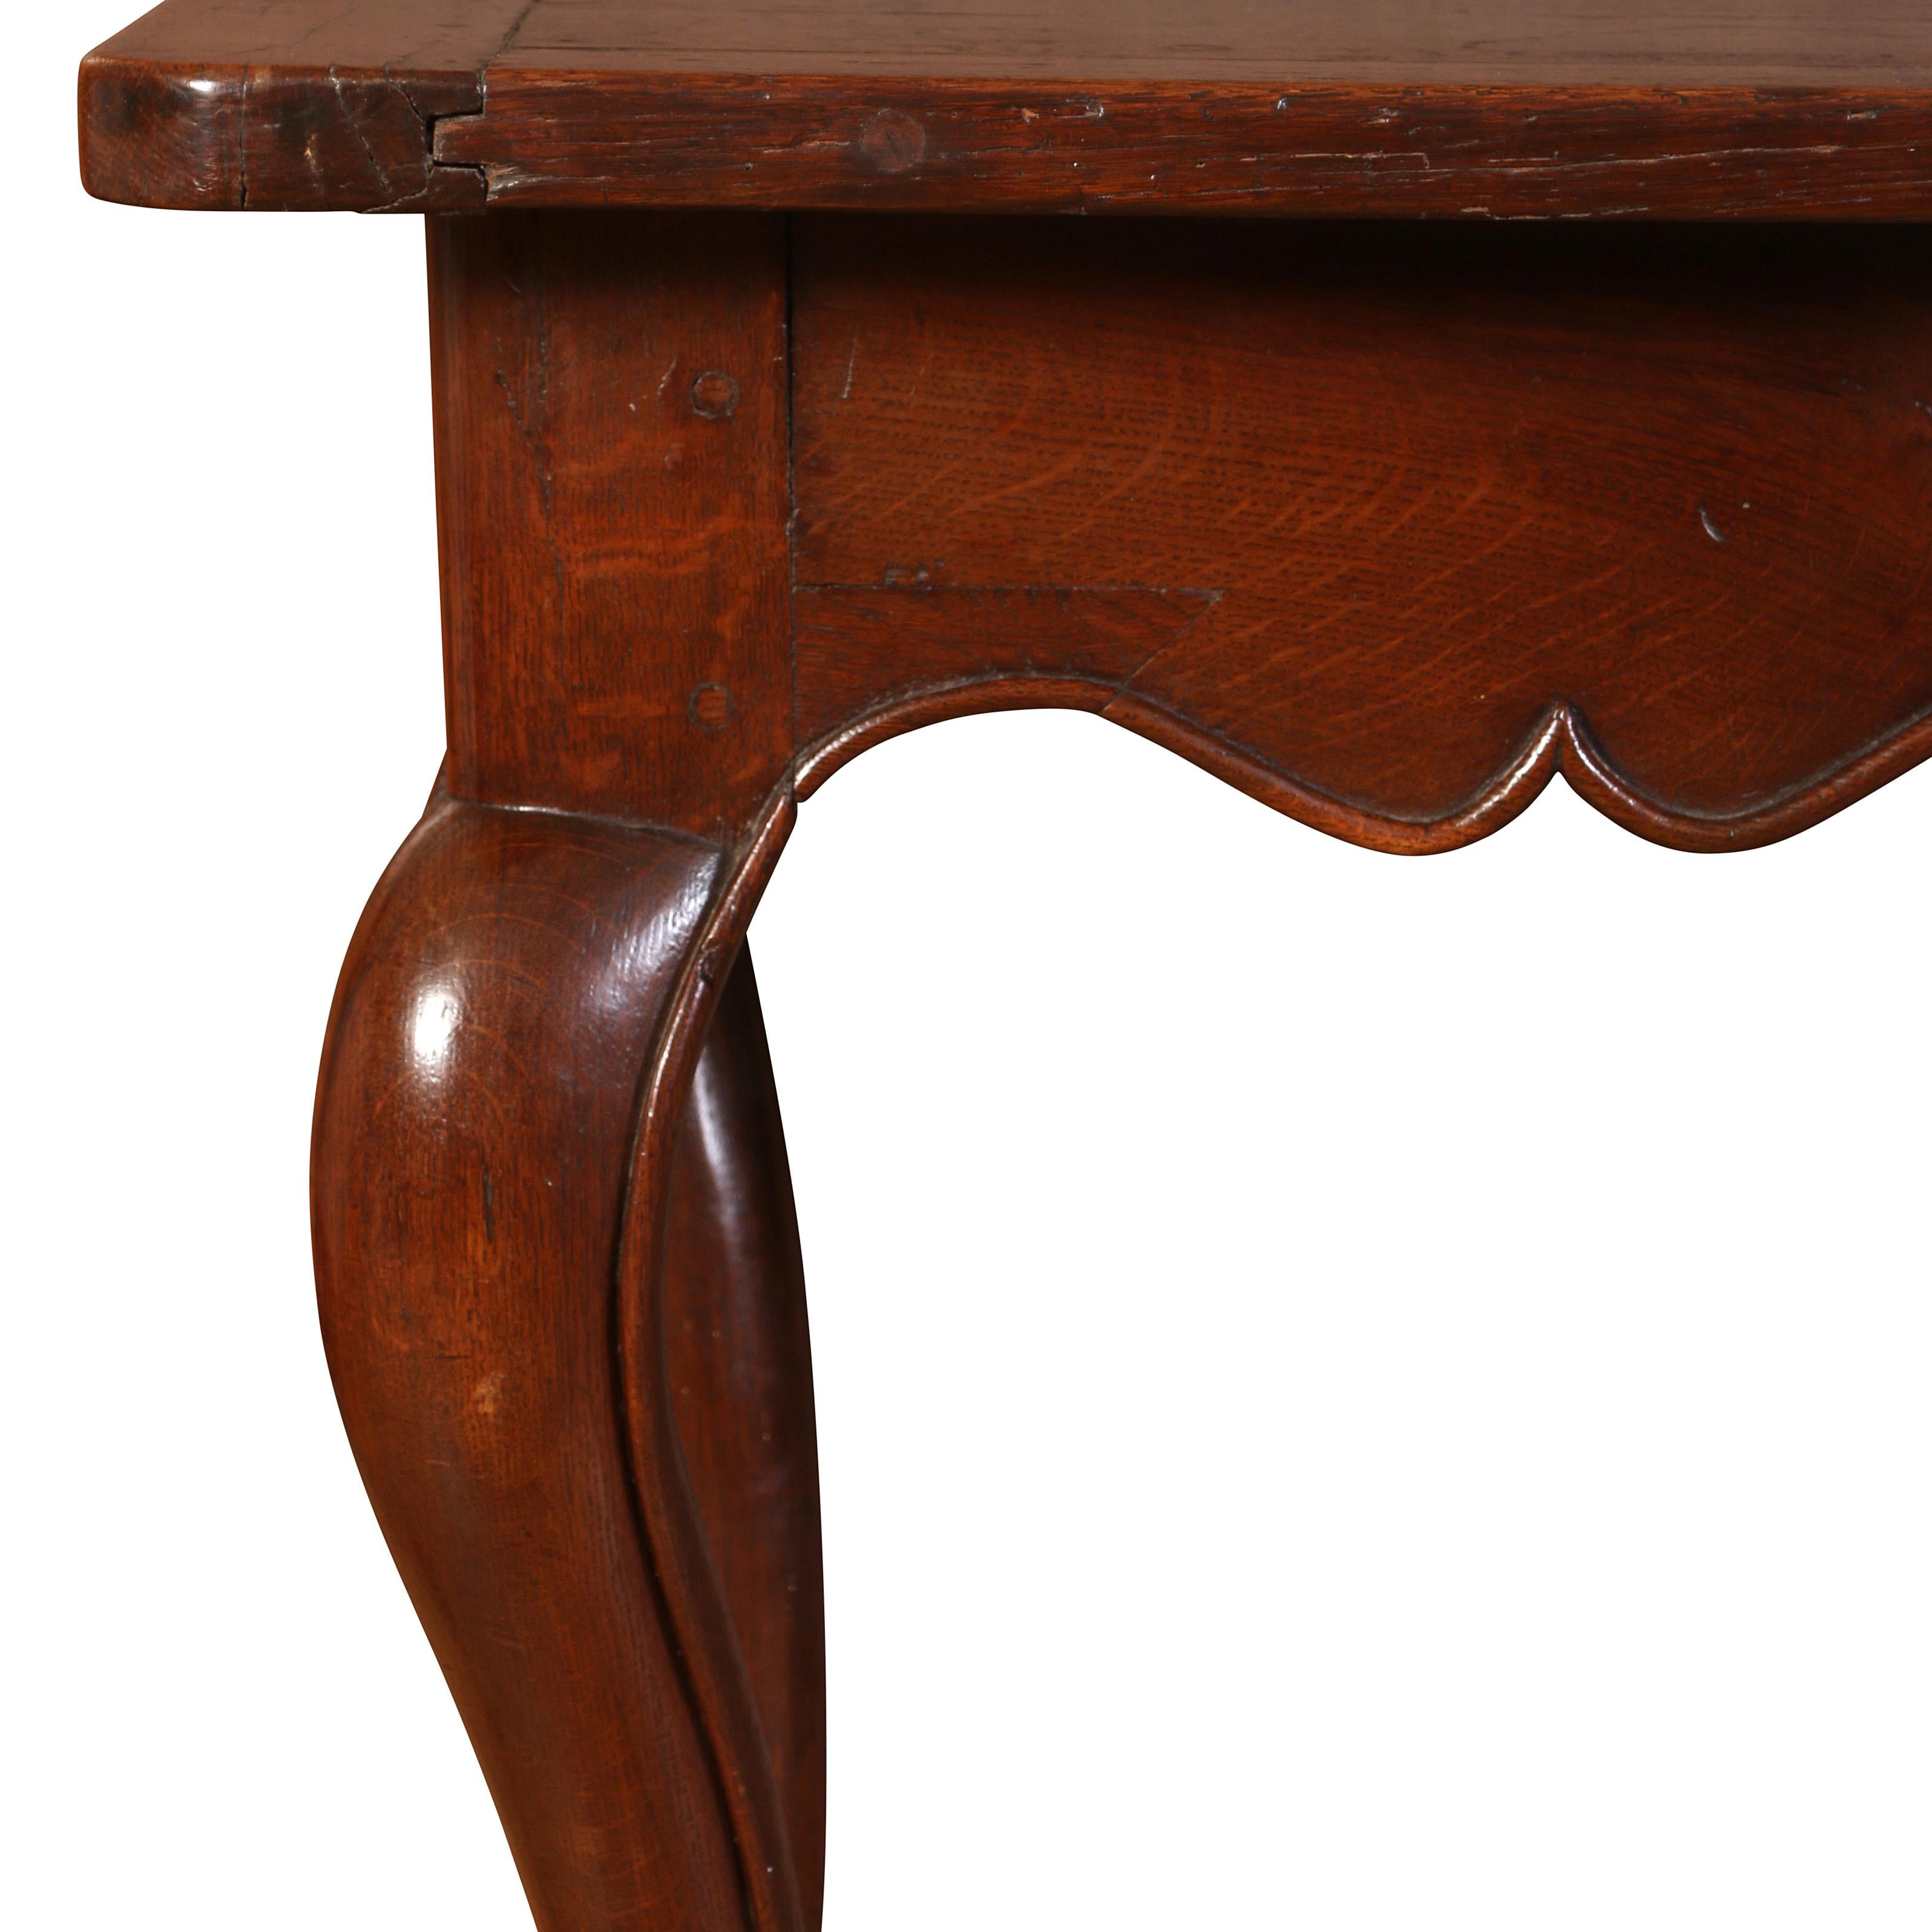 A charming 19th century oak hall or console table with, this gem has a solid oak top with two banded ends.  In the Louis XV style, the table is raised on cabriole legs and has a wonderful scalloped apron.  Having stood the test of time, the table